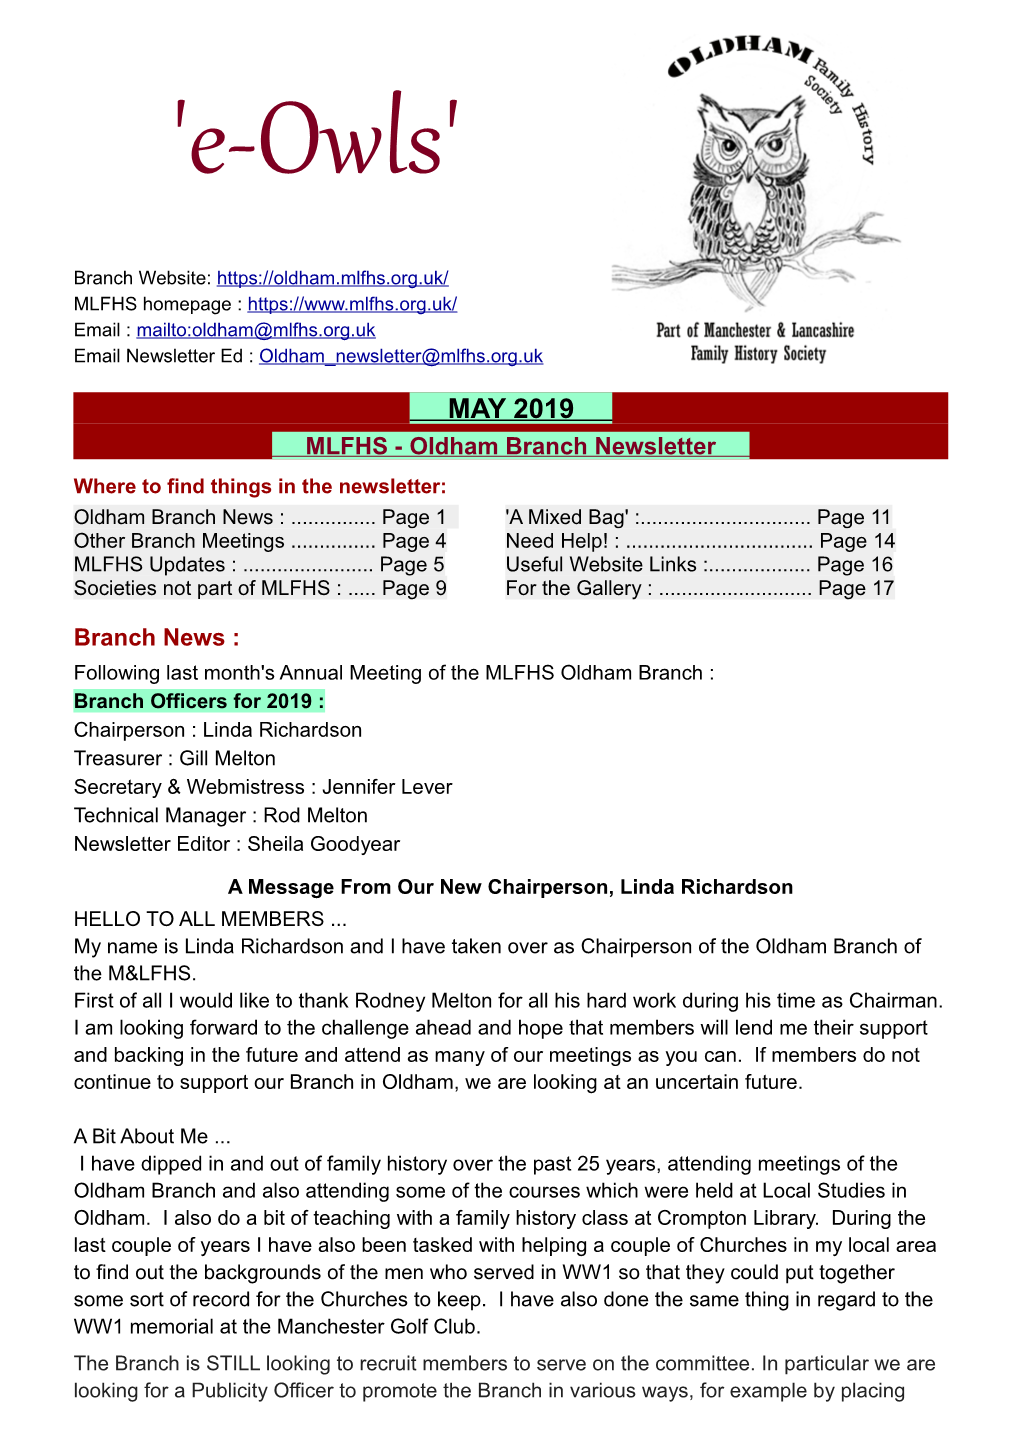 MAY 2019 MLFHS - Oldham Branch Newsletter Where to Find Things in the Newsletter: Oldham Branch News :